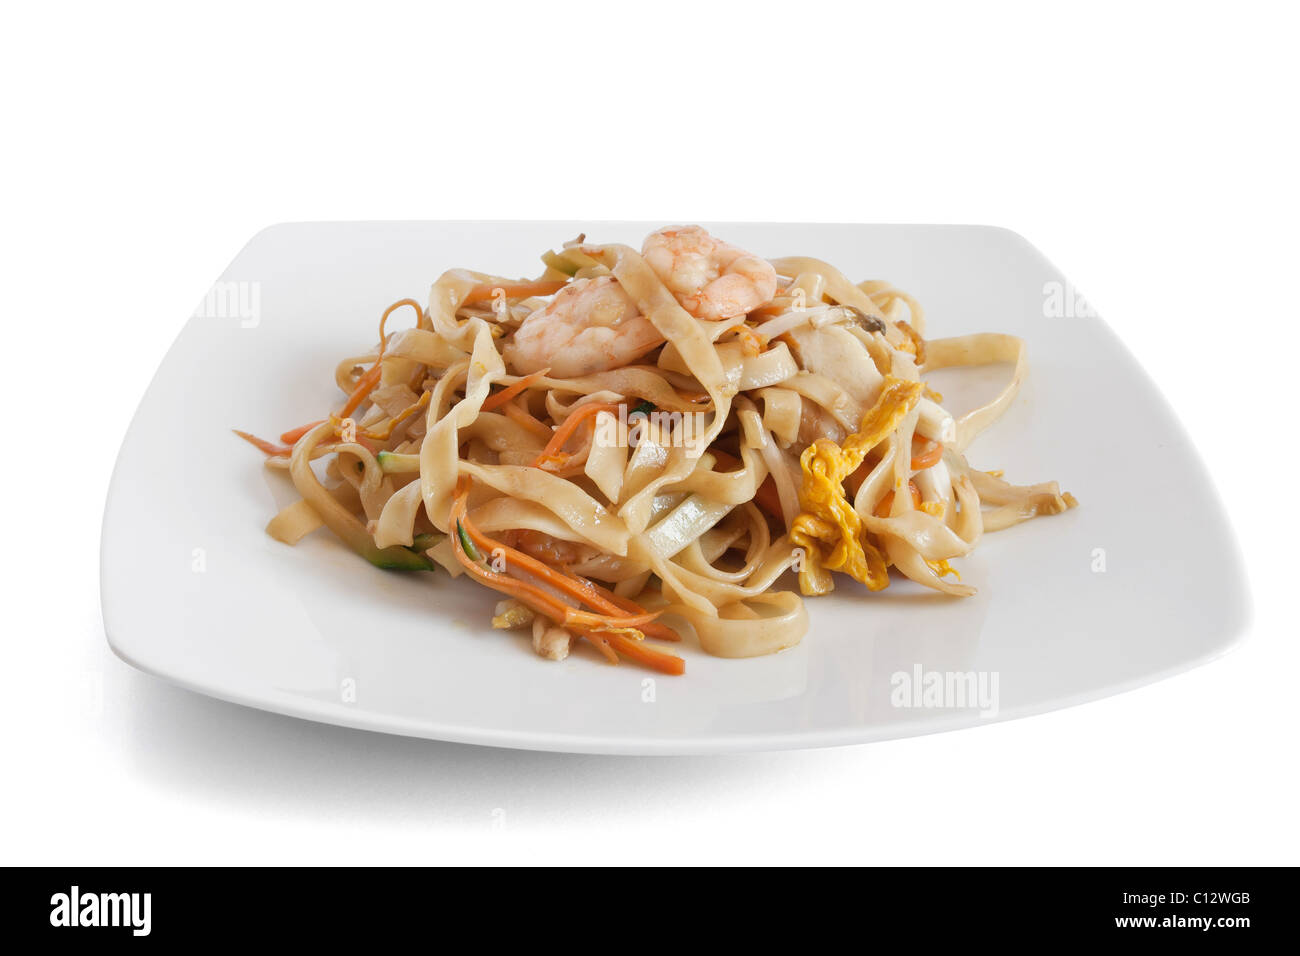 dish with noodles and seafood isolated on white with clipping path Stock Photo